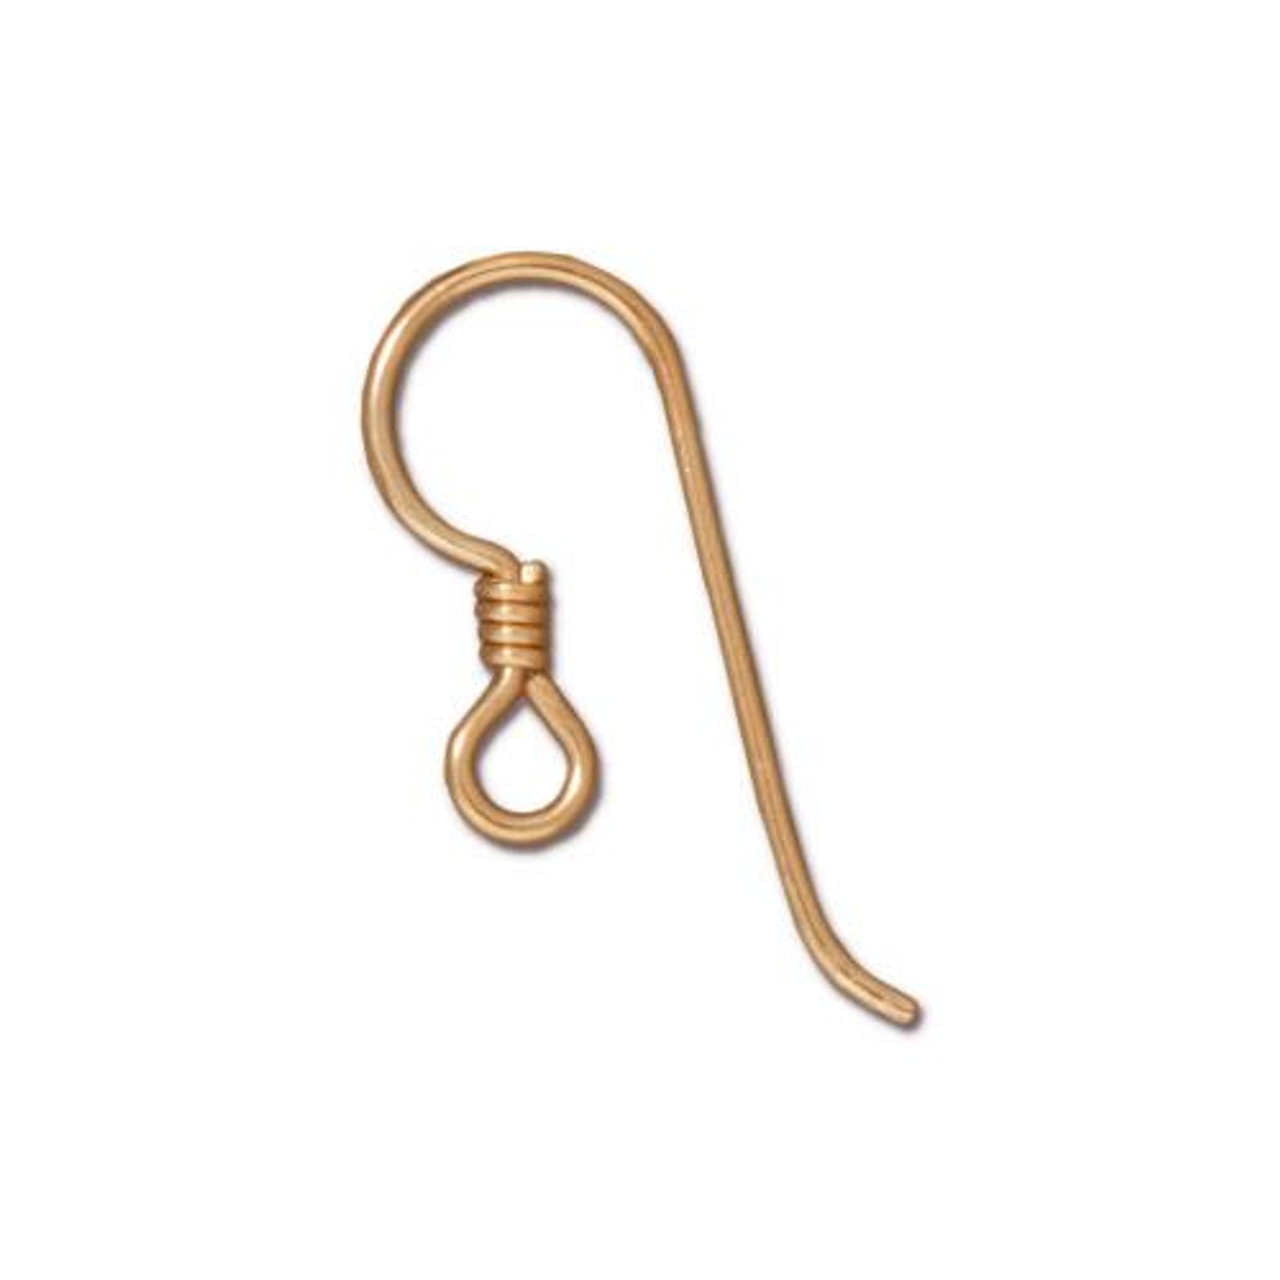 French Hook Ear Wire with Coil, 14/20 Gold Filled, 50 per Pack -  TierraCast, Inc.